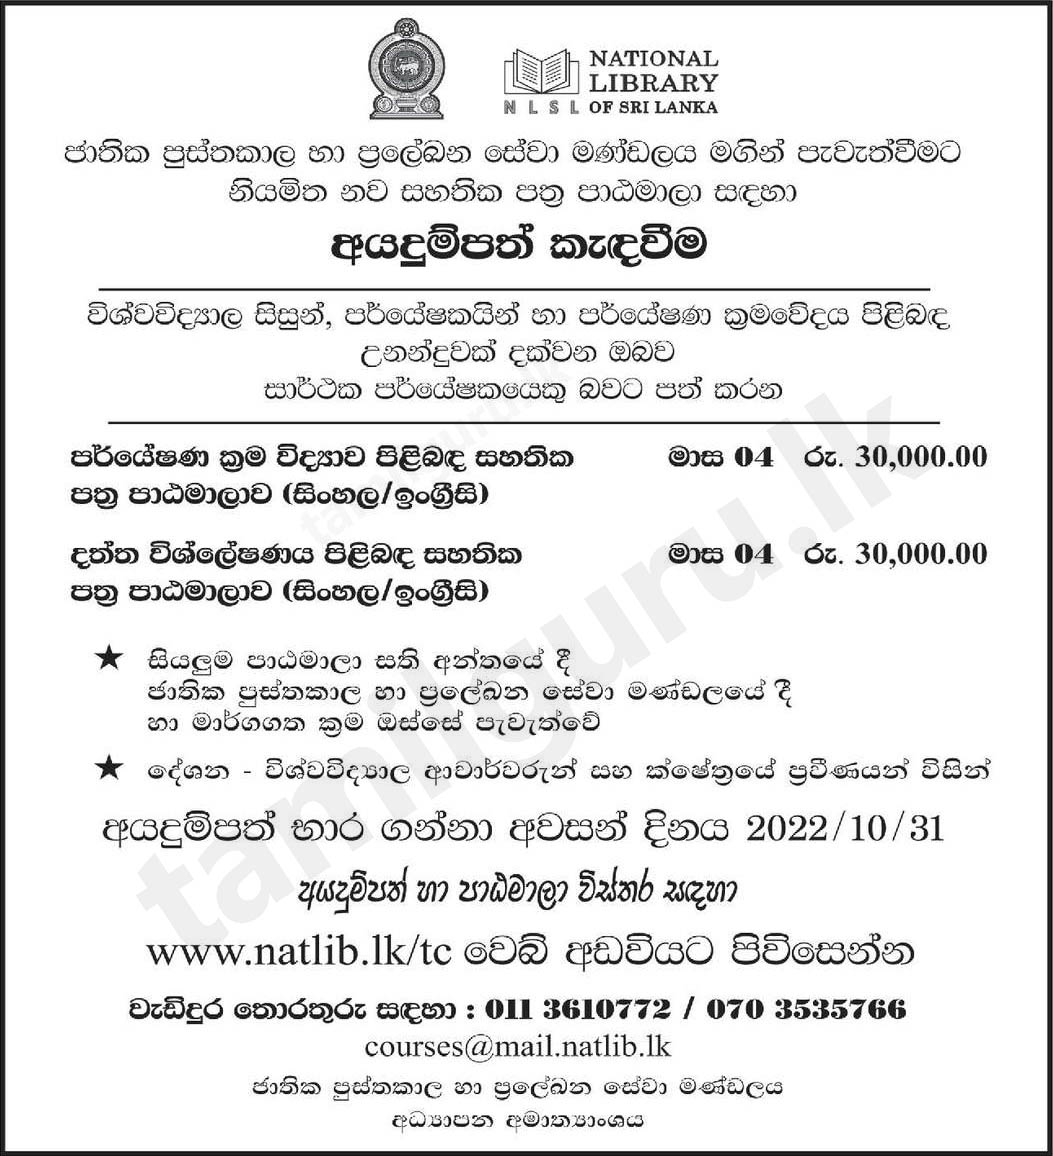 National Library - Application for Certificate Courses 2022